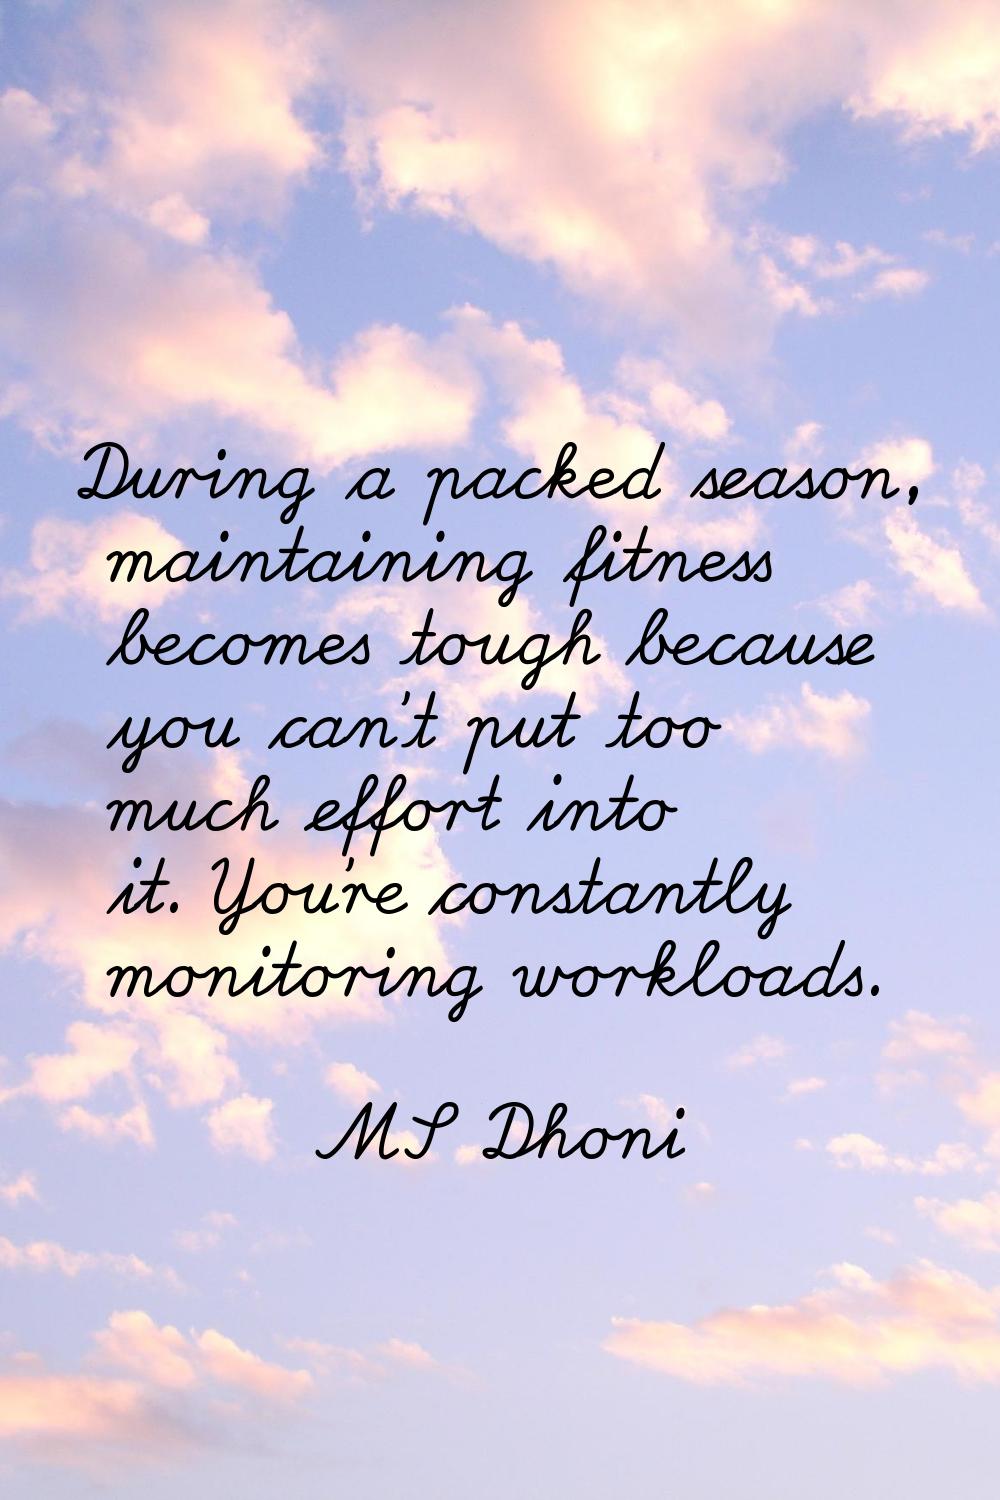 During a packed season, maintaining fitness becomes tough because you can't put too much effort int